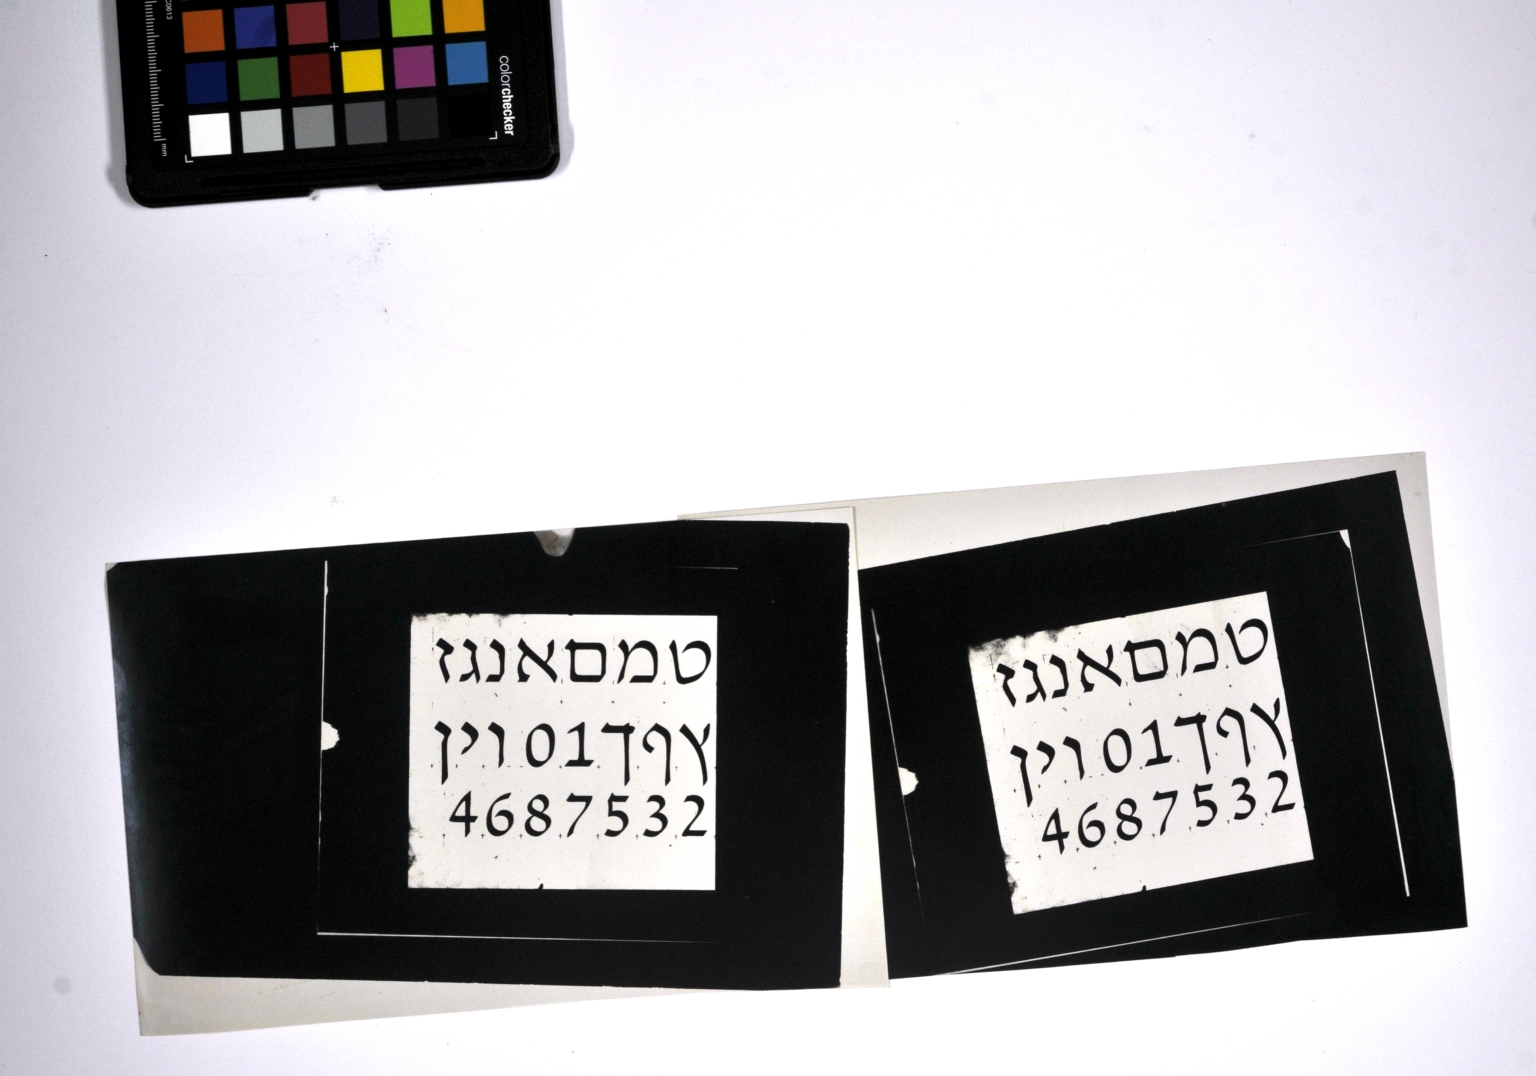 Redrawings of the David Hebrew typeface for dry transfer lettering: book style, light weight.